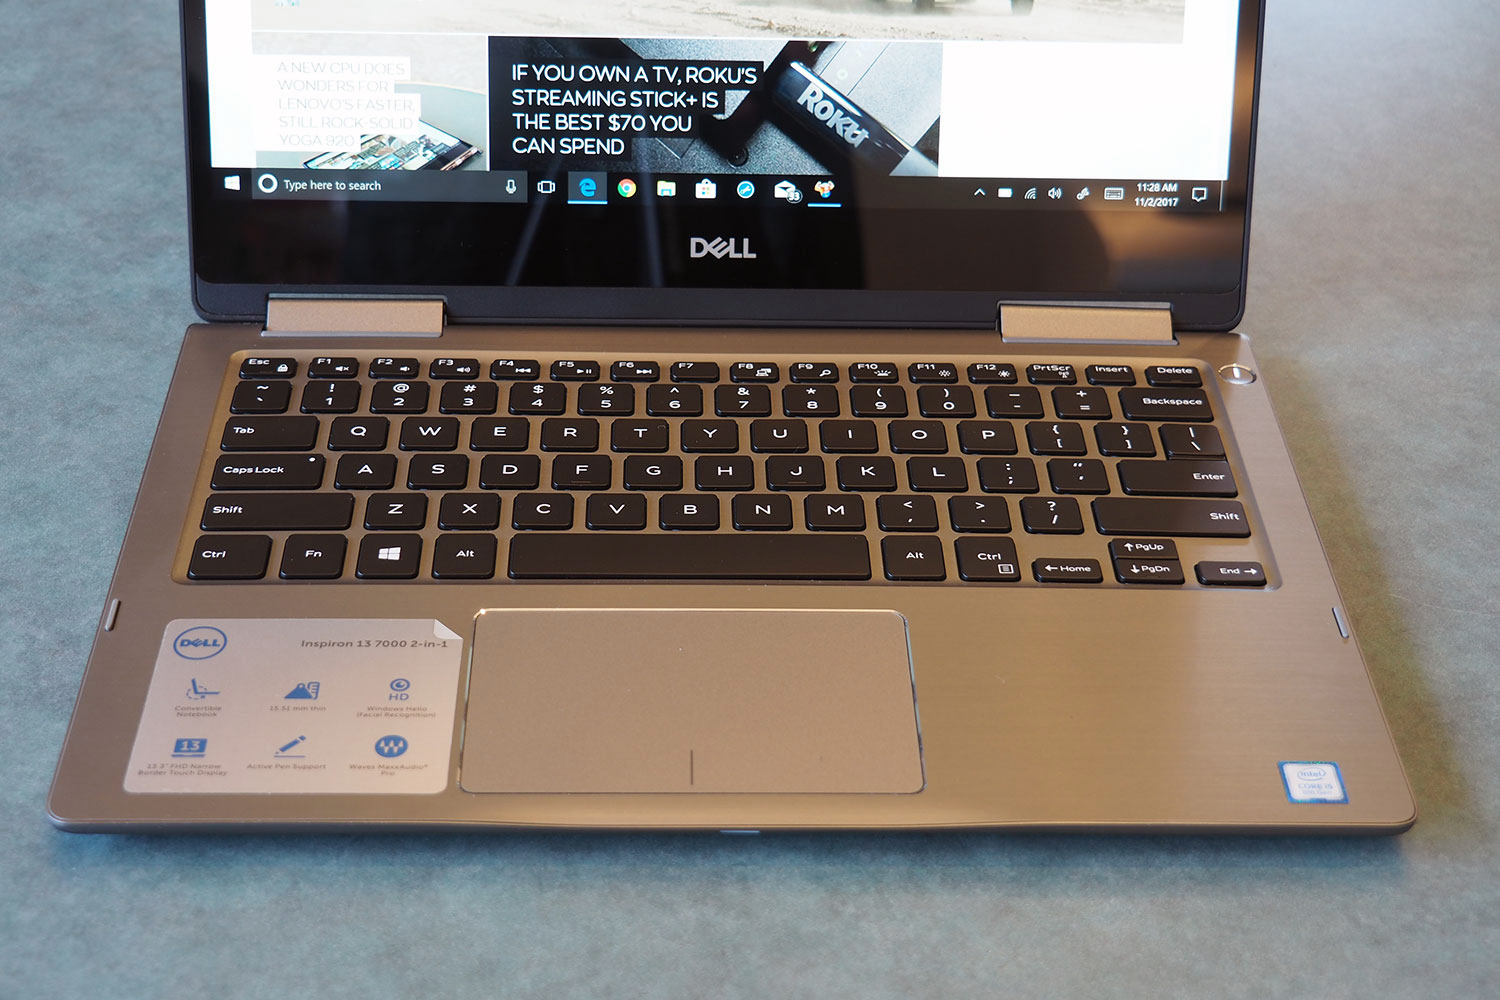 Dell Inspiron 13 7000 2-in-1 (2017) Review | Digital Trends